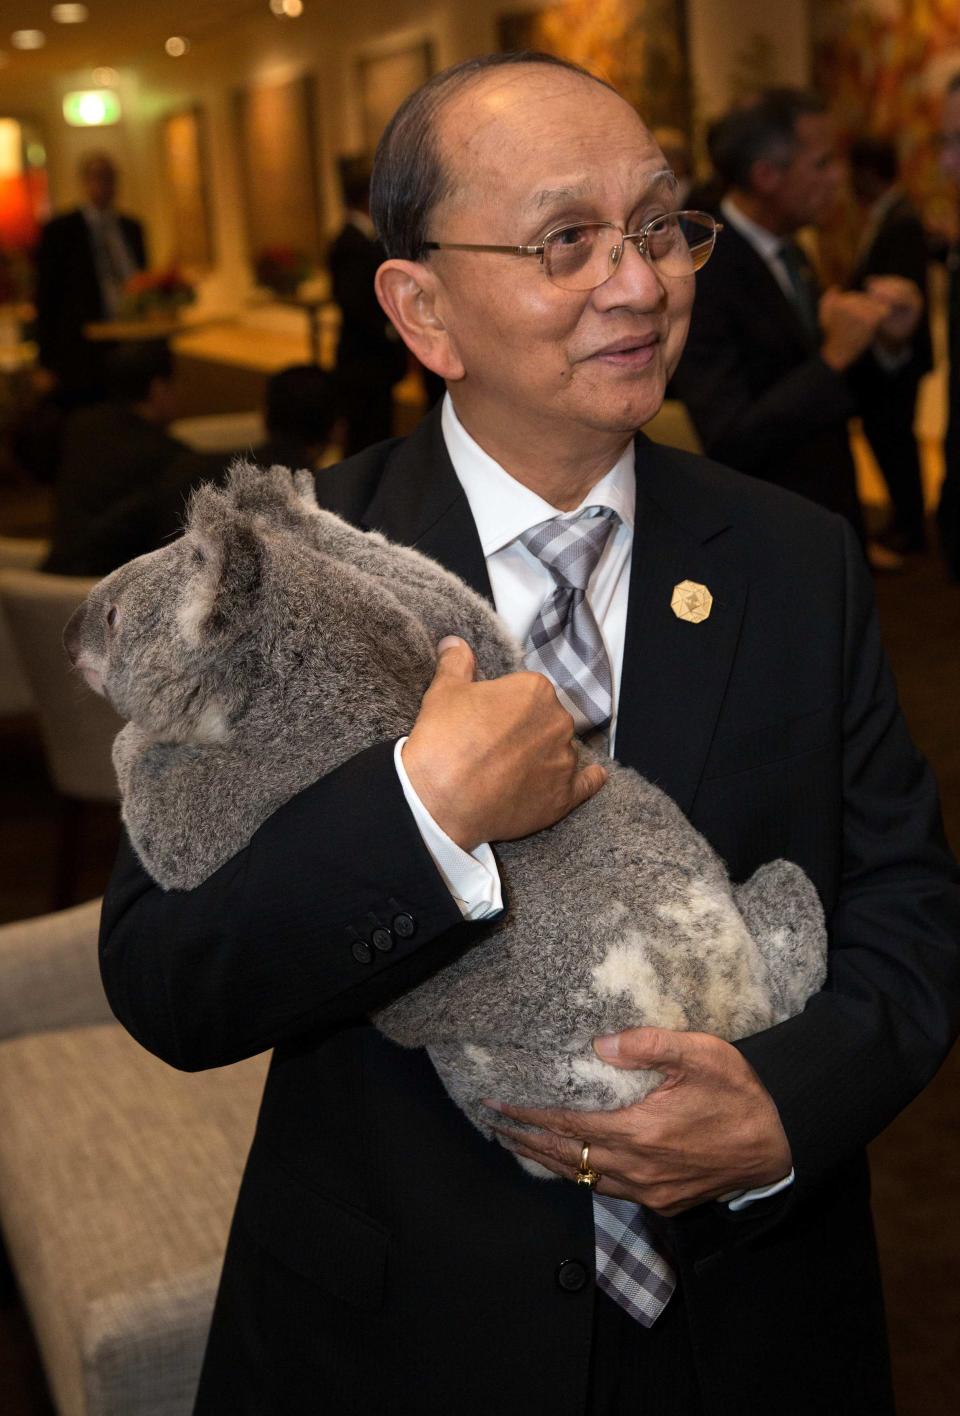 G20 handout photo shows Myanmar's President Thein Sein holding a koala before the G20 Leaders' Summit in Brisbane